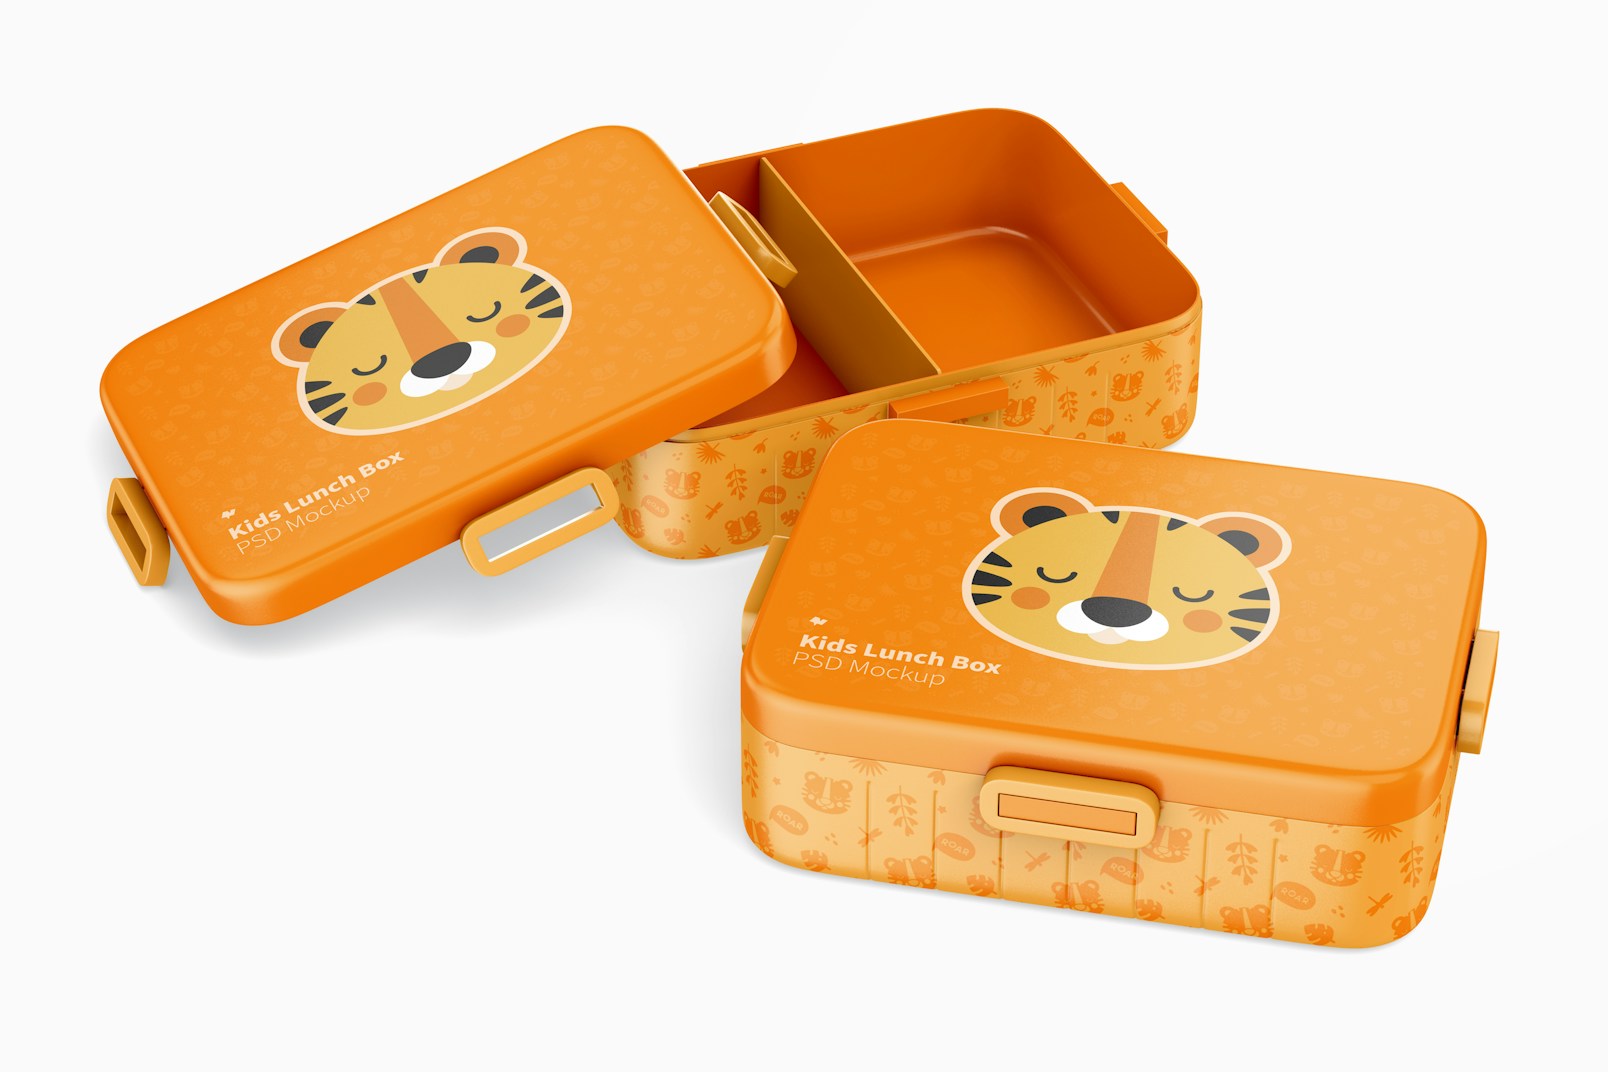 Kids Lunch Box Mockup, Opened and Closed